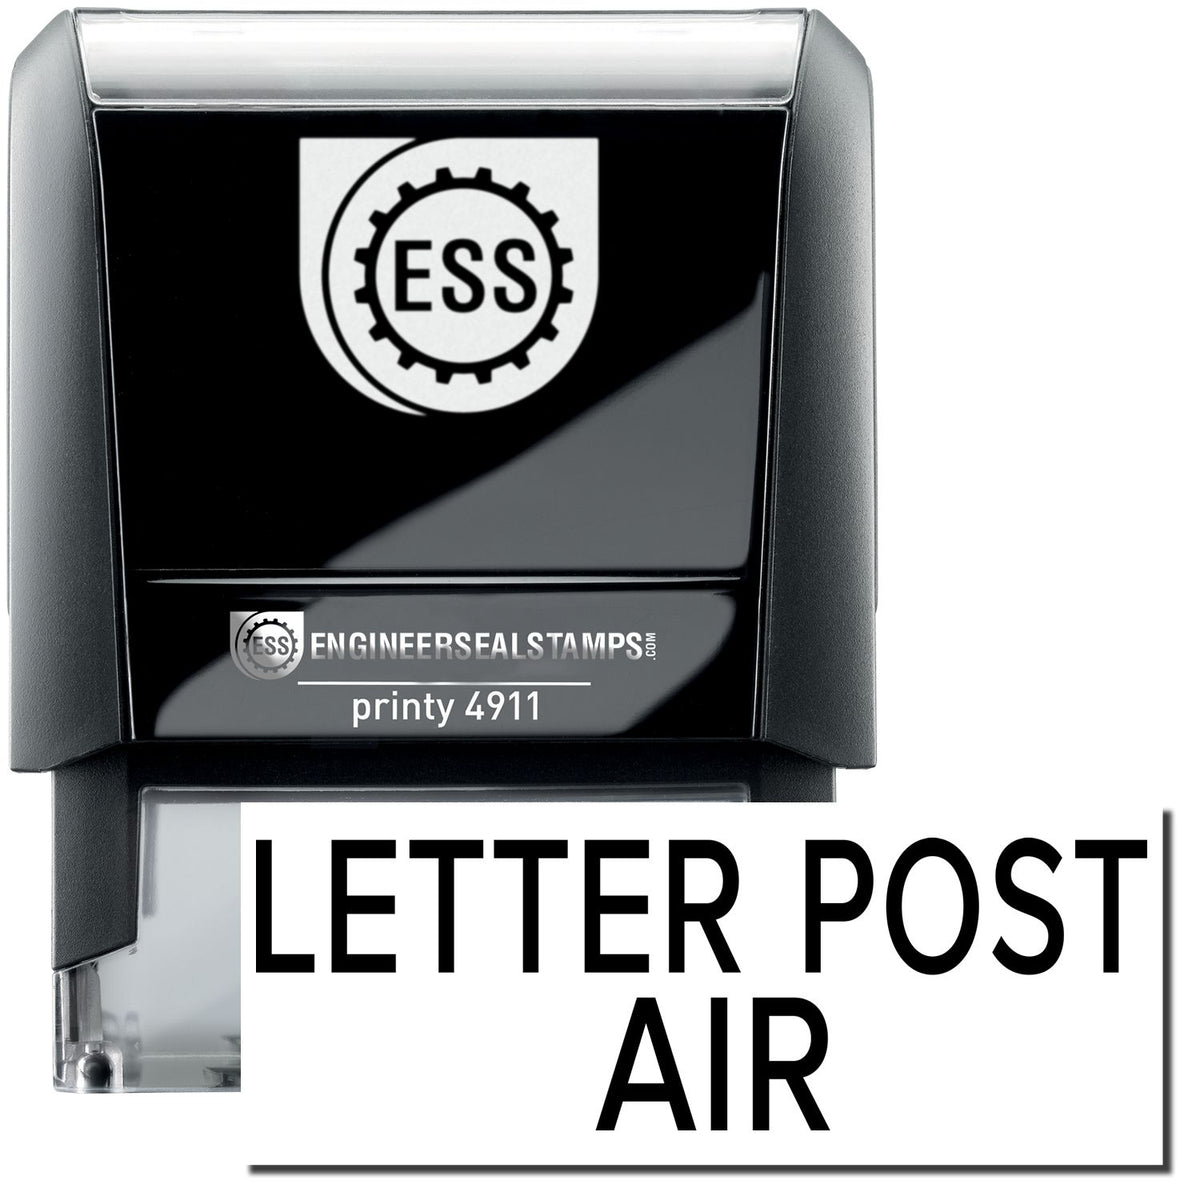 A self-inking stamp with a stamped image showing how the text &quot;LETTER POST AIR&quot; is displayed after stamping.